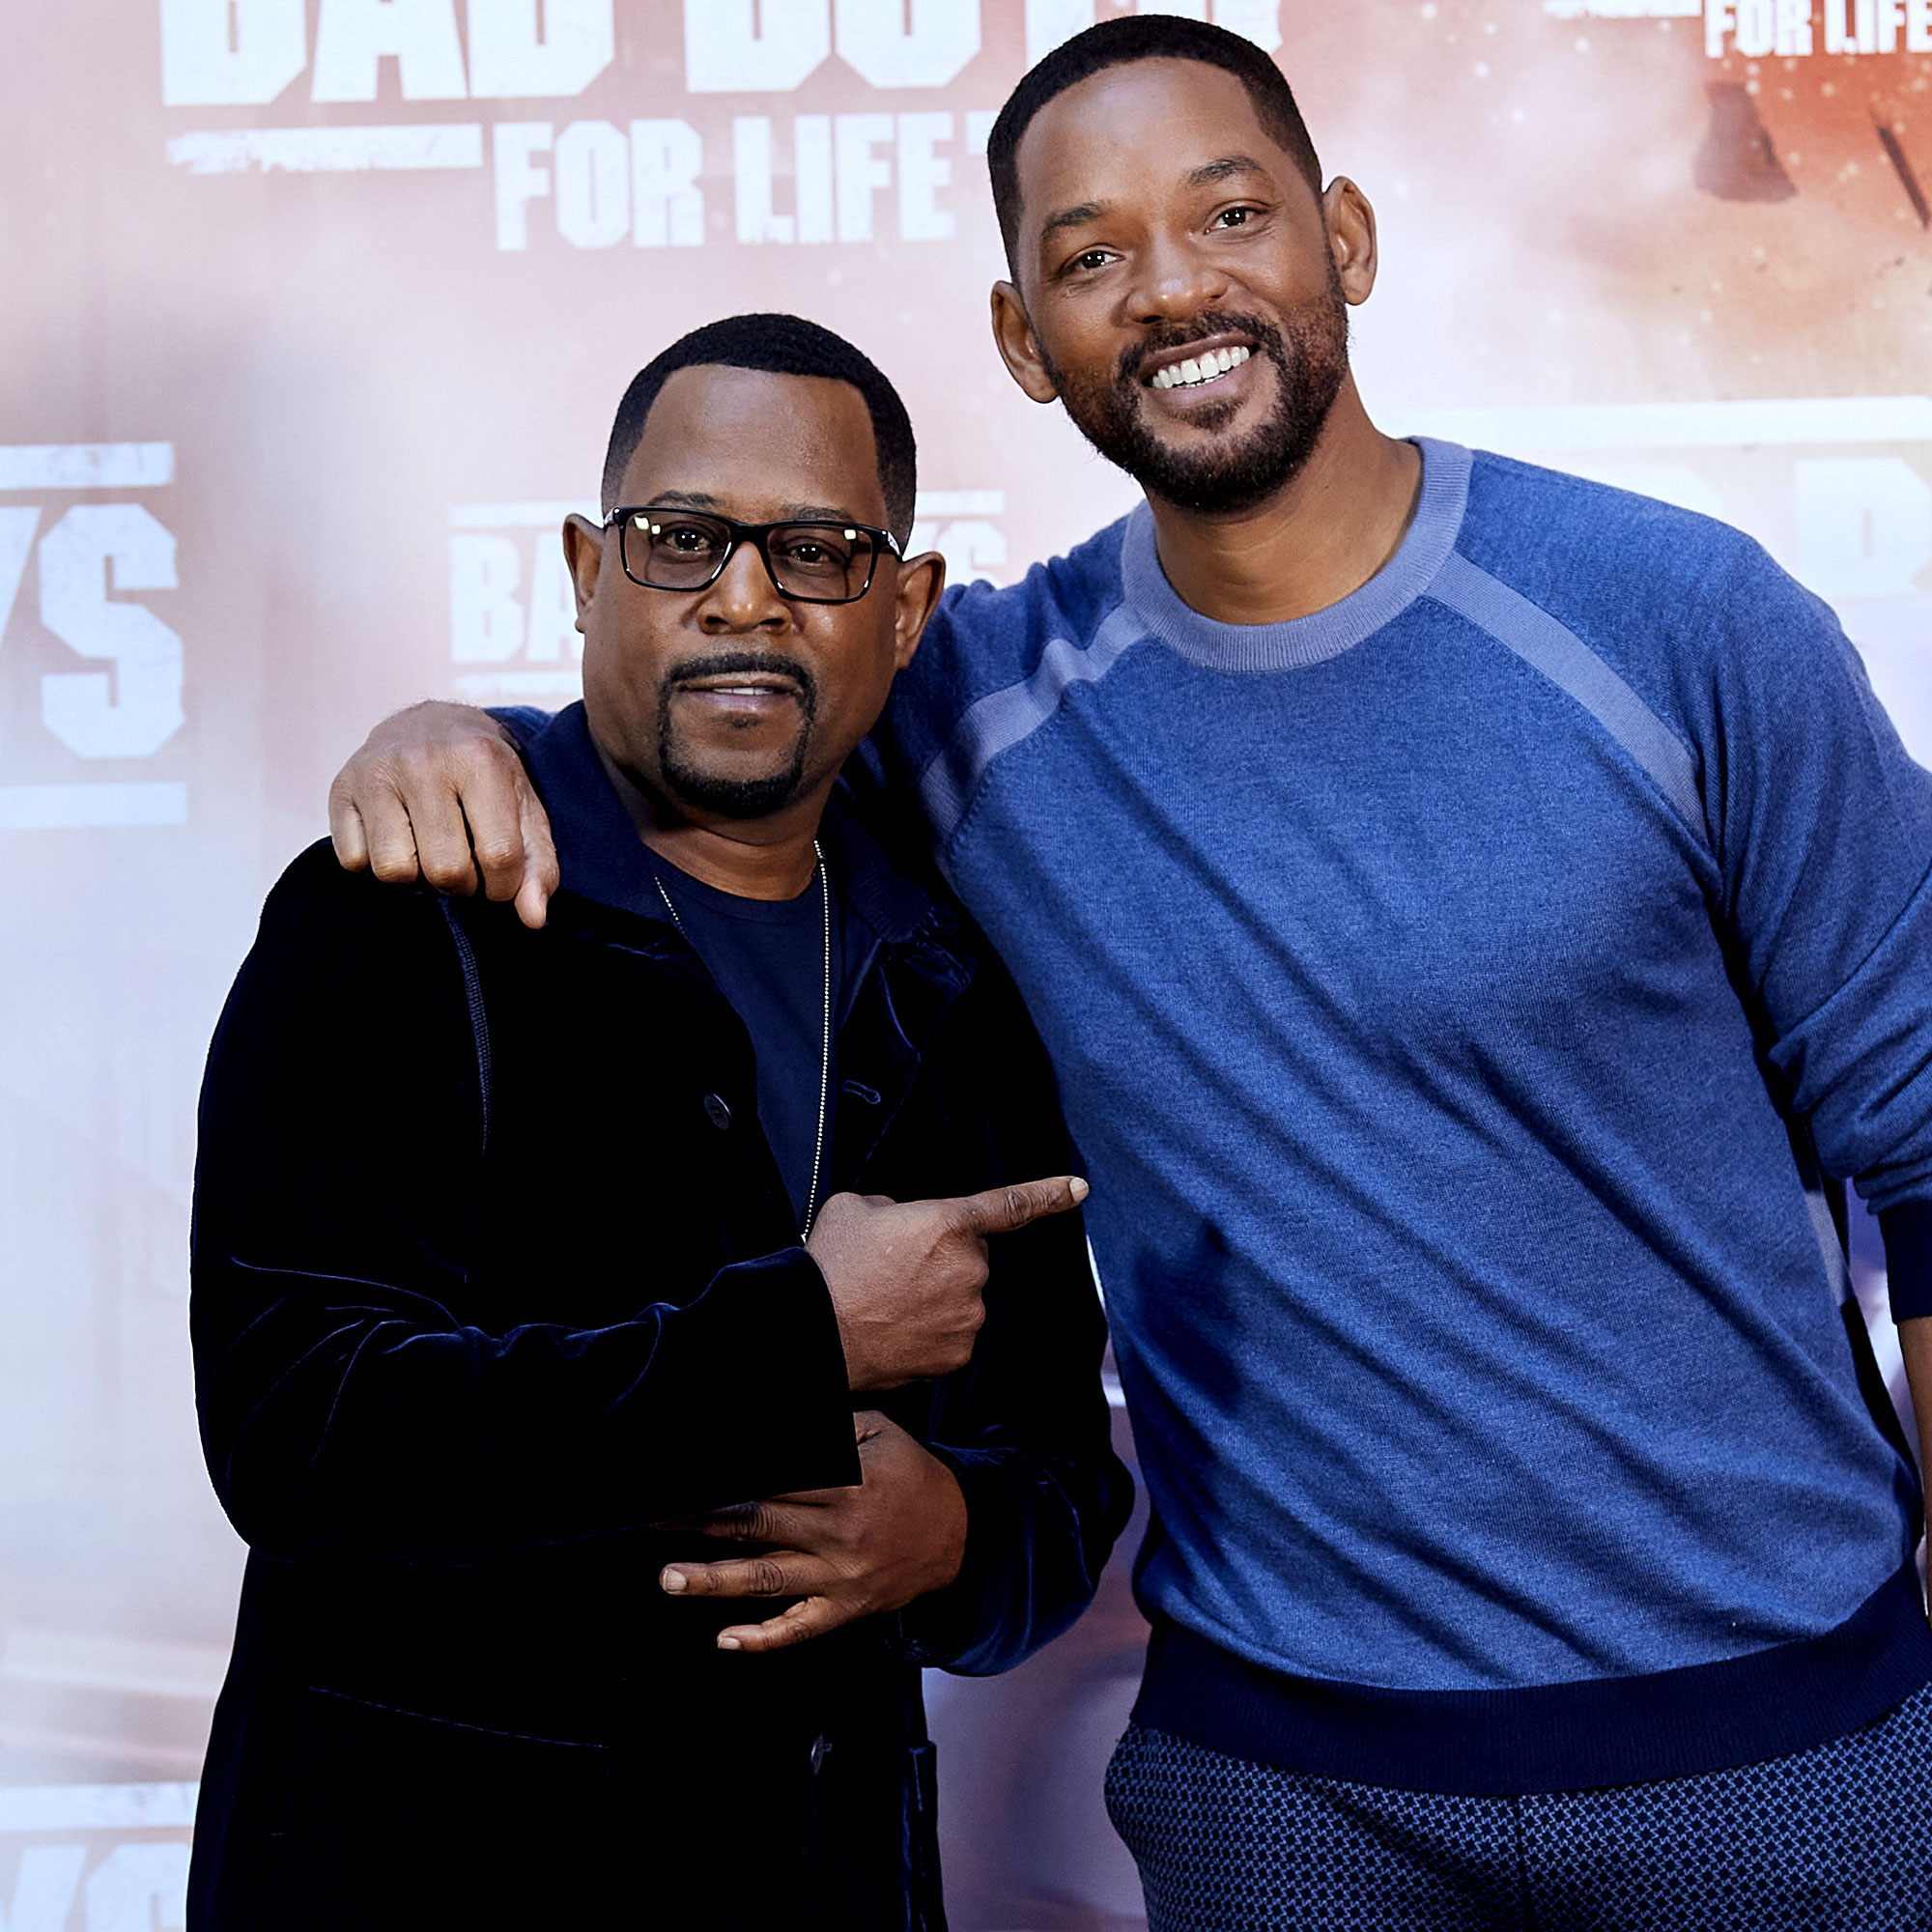 Martin Lawrence: 'Bad Boys 4' Is Happening After Will Smith Slap